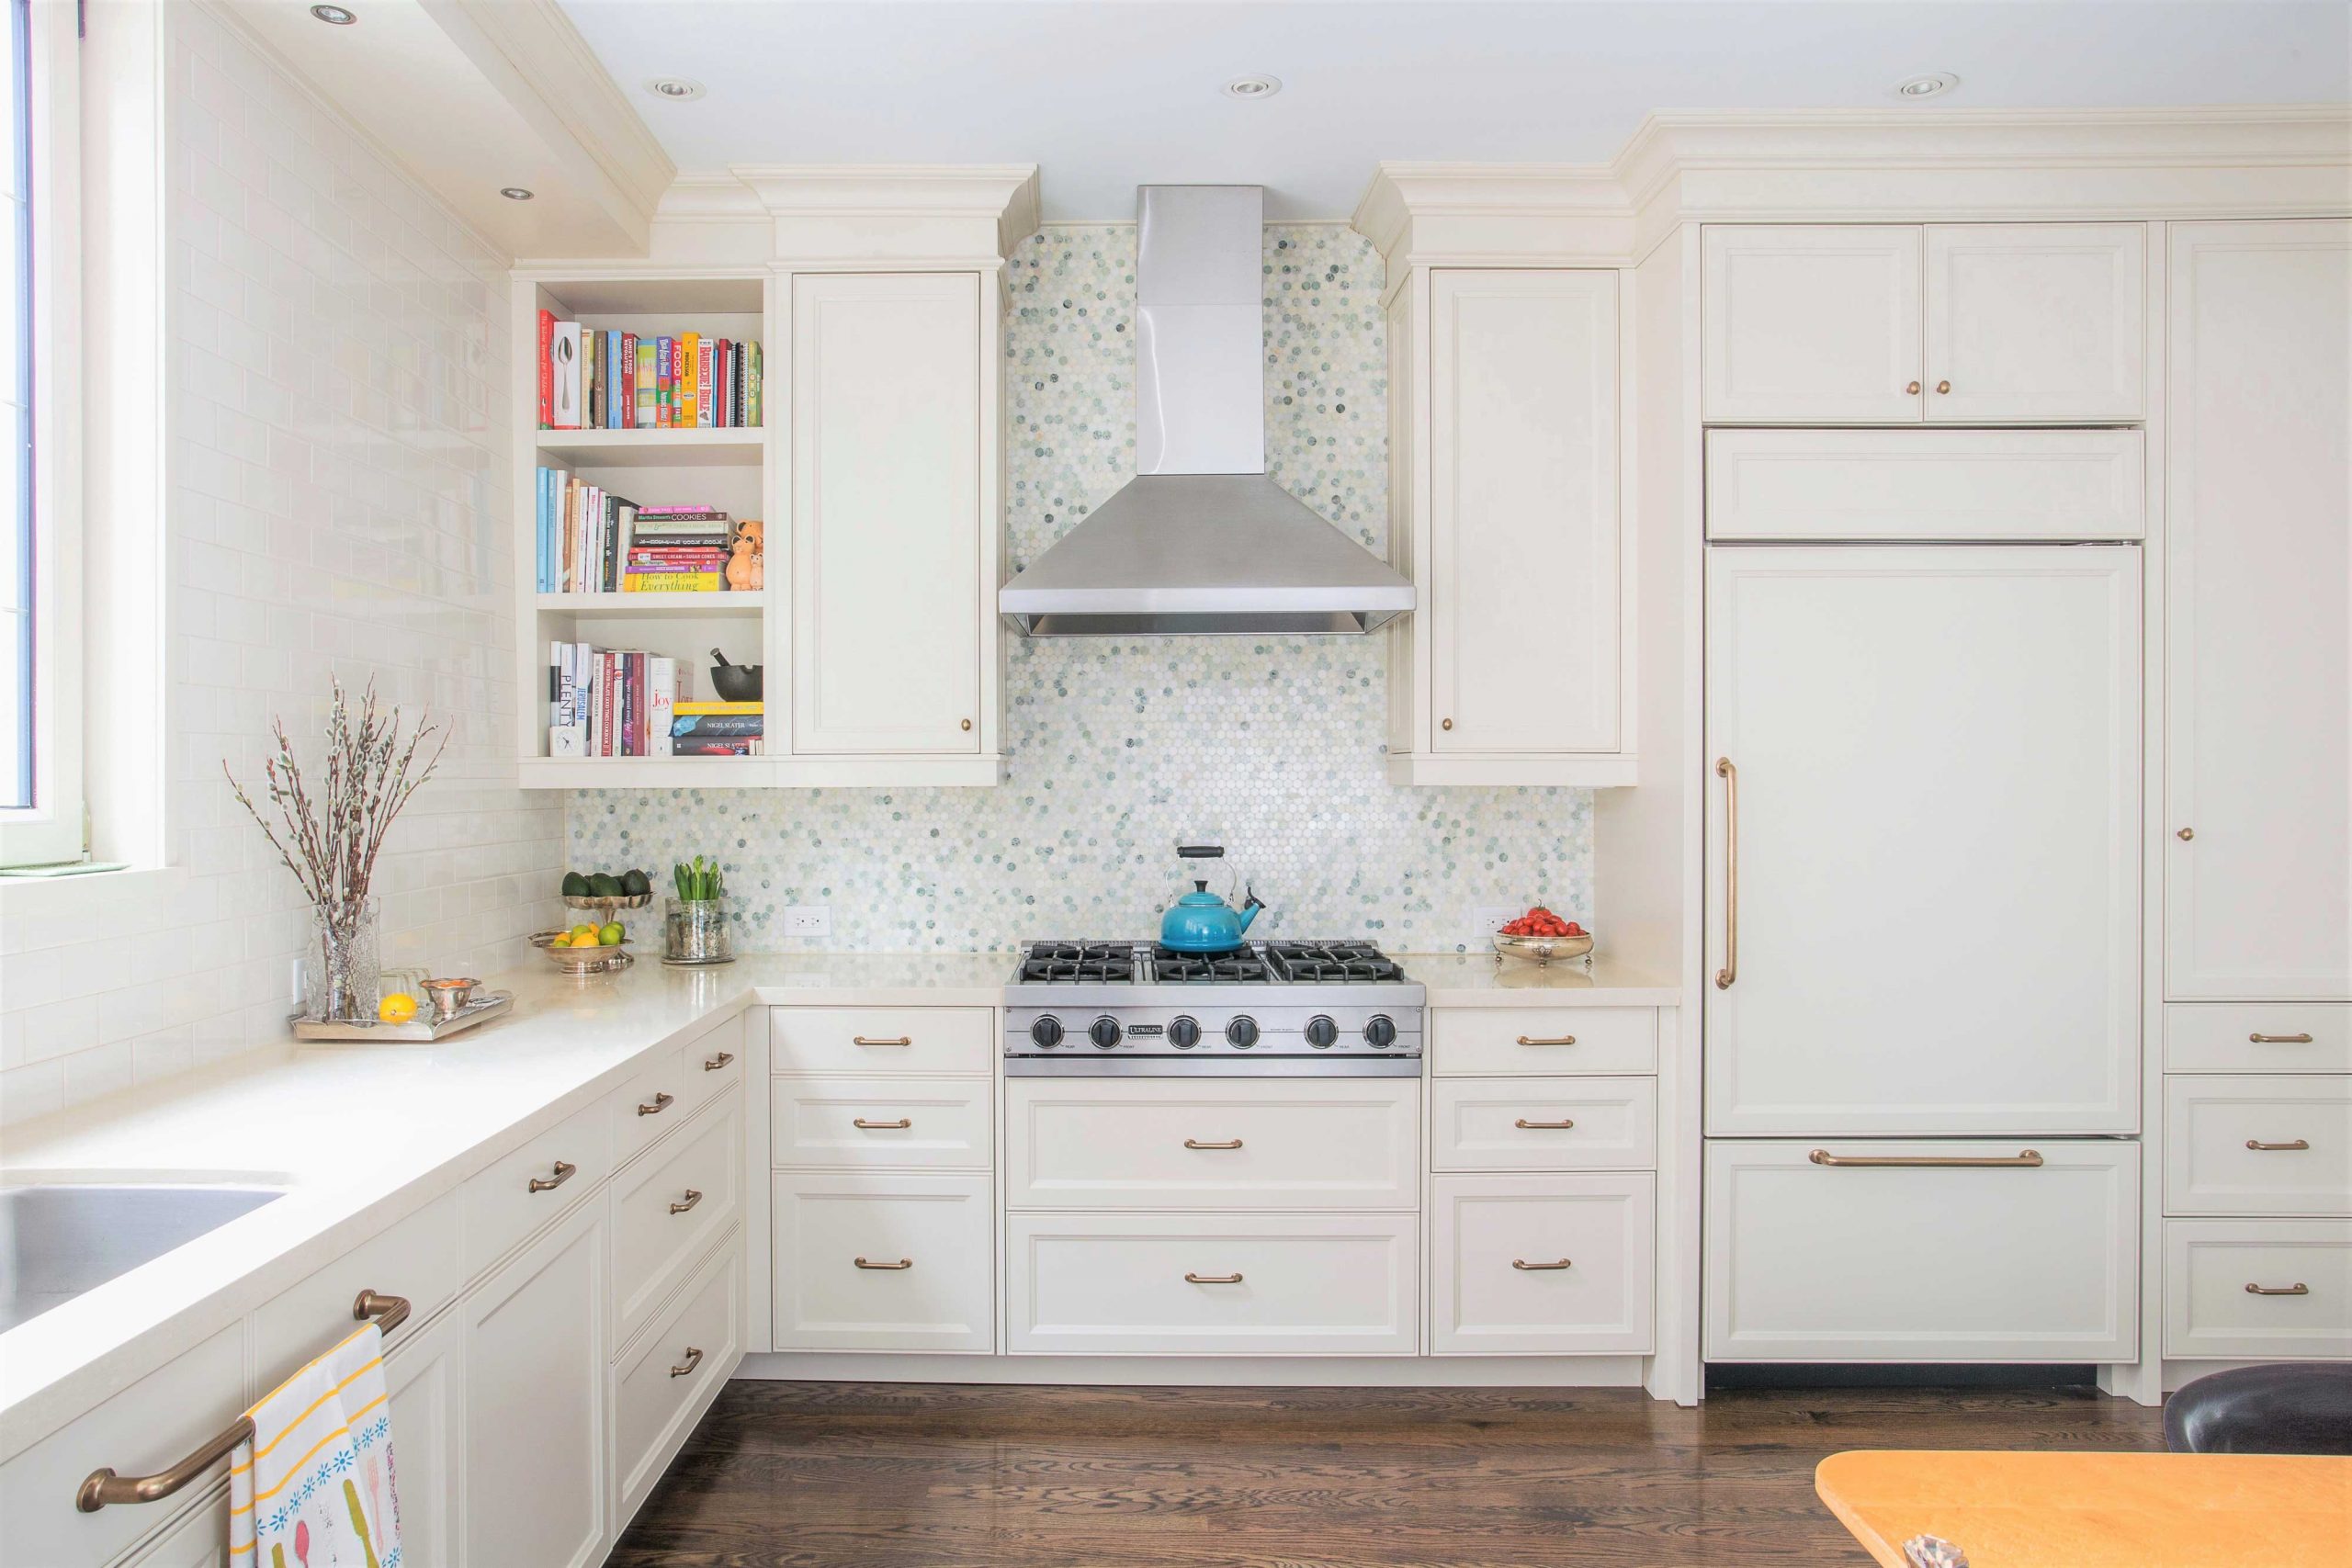 5 Trending Ideas for upgrading your Kitchen